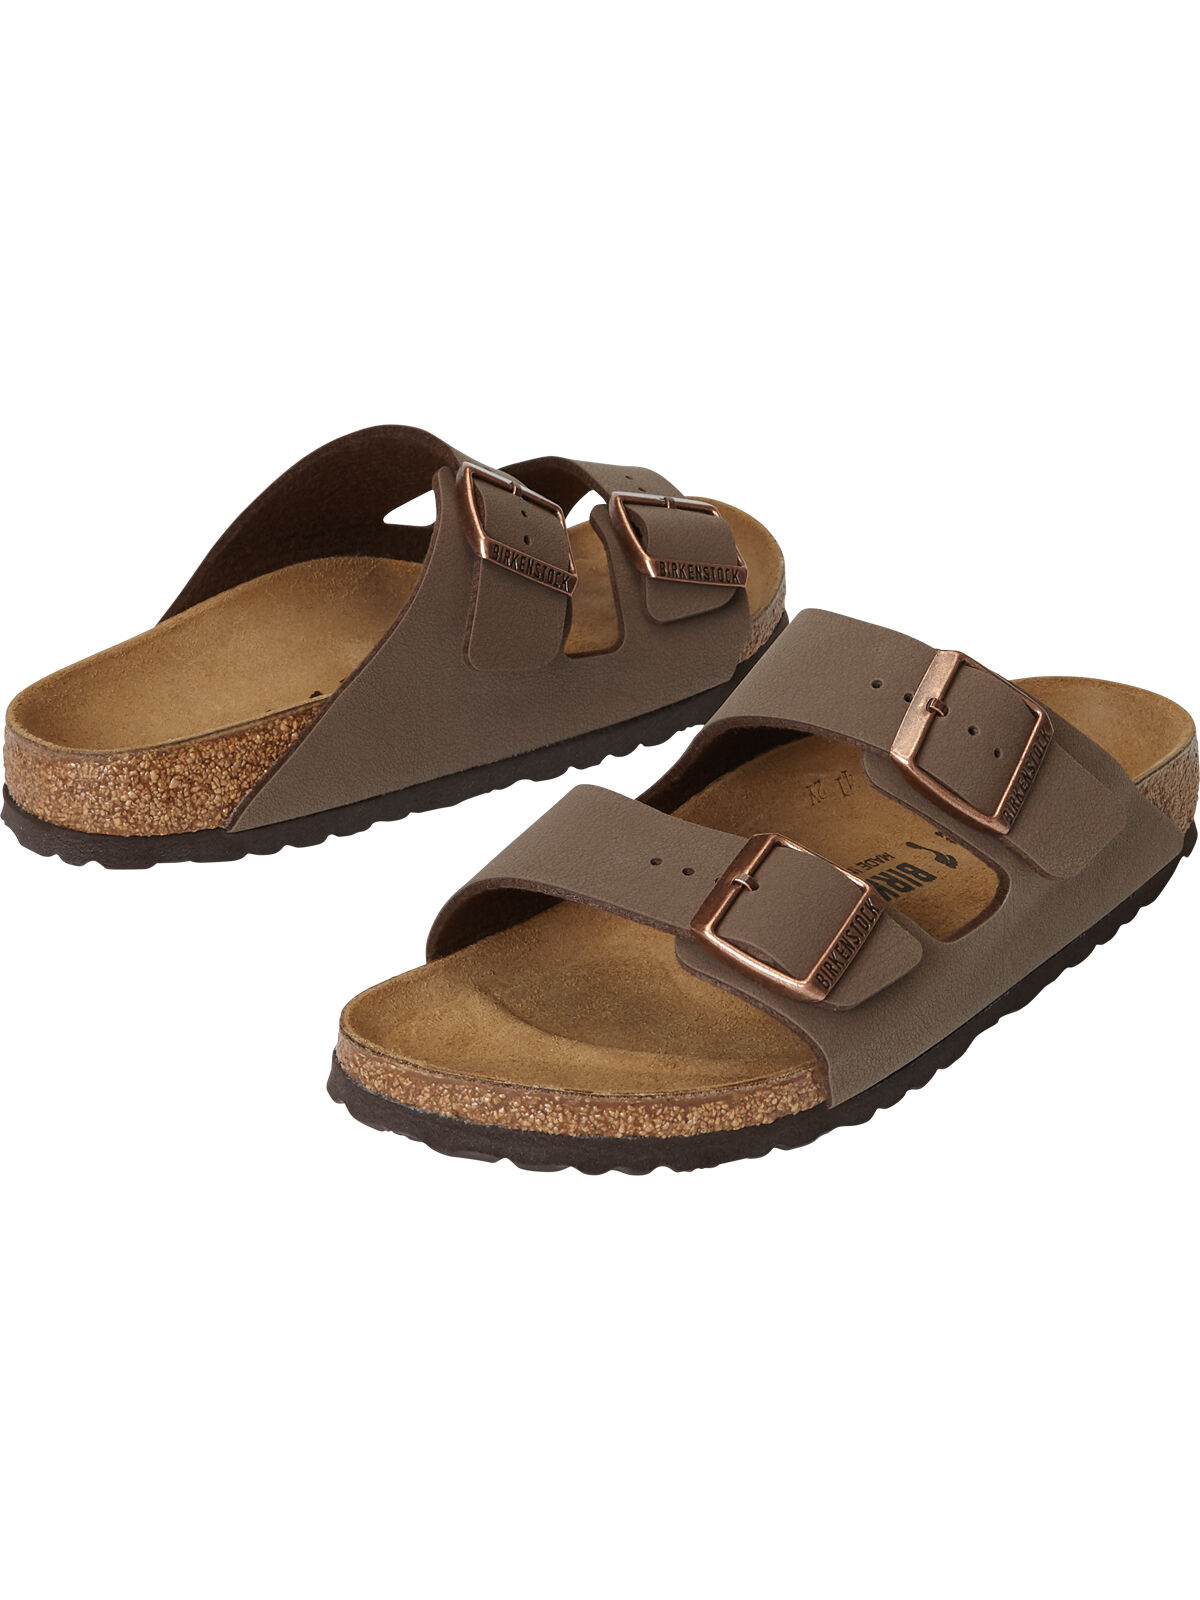 These Birkenstock look-alike sandals are only $30 at Kohl's